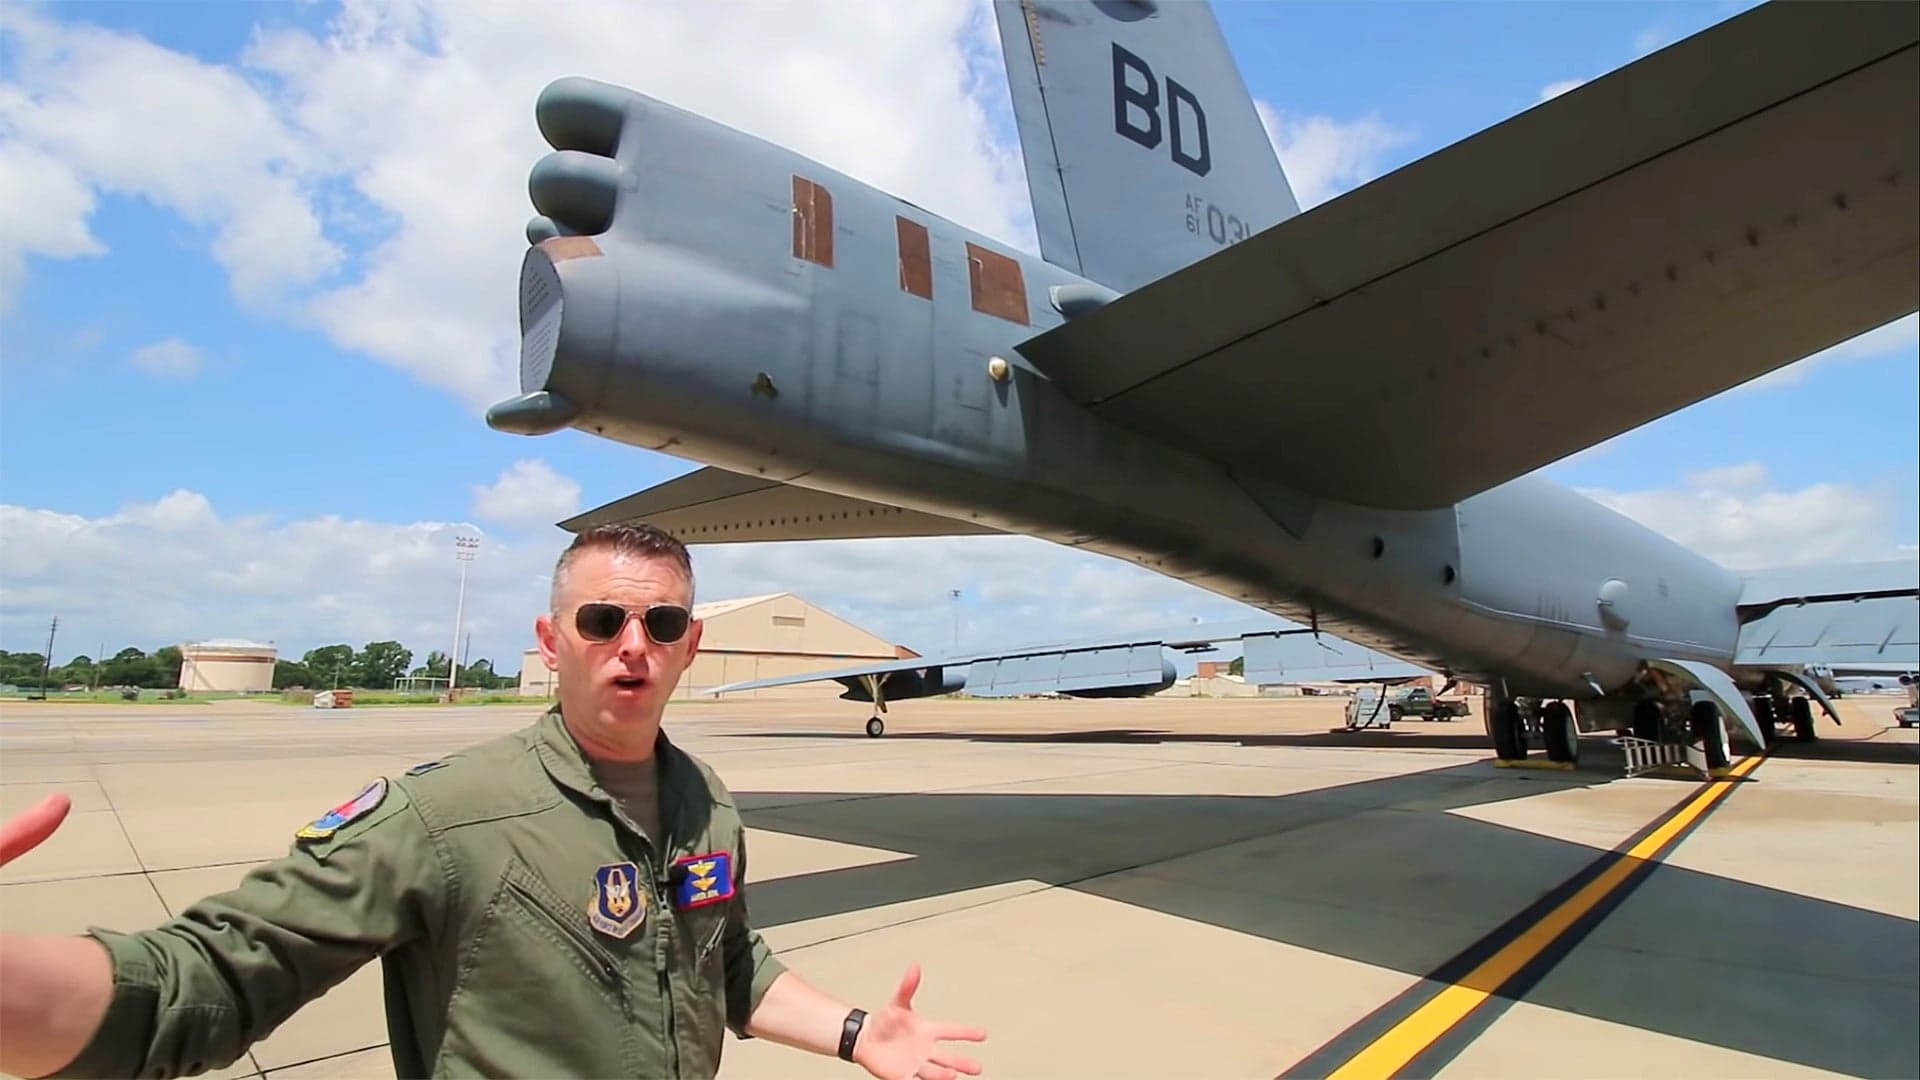 This Is The Most Incredible Tour Of A B-52 Stratofortress We Have Ever Seen